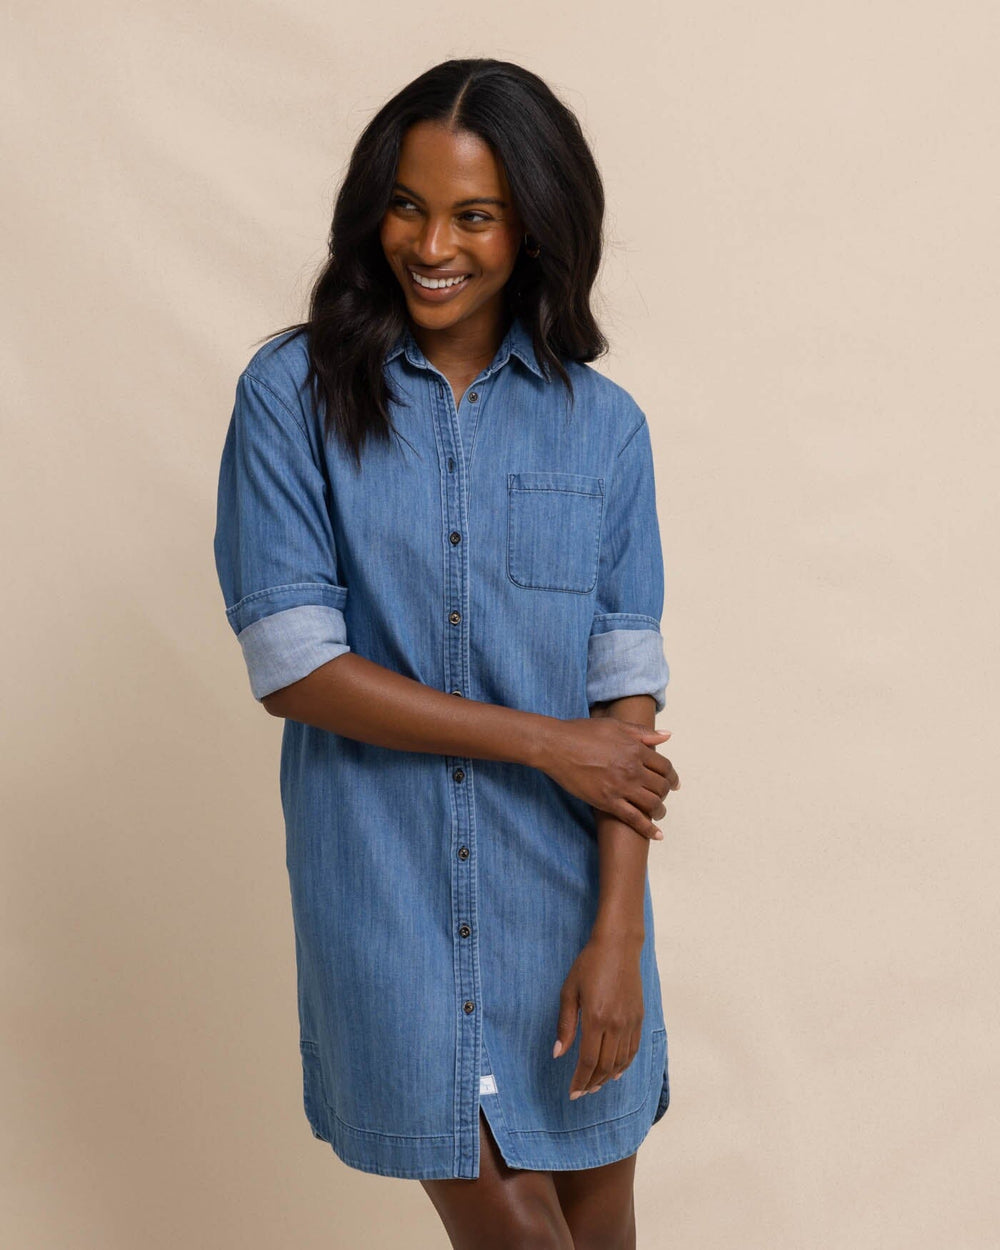 The front view of the Southern Tide Cam Denim Dress by Southern Tide - Medium Wash Indigo